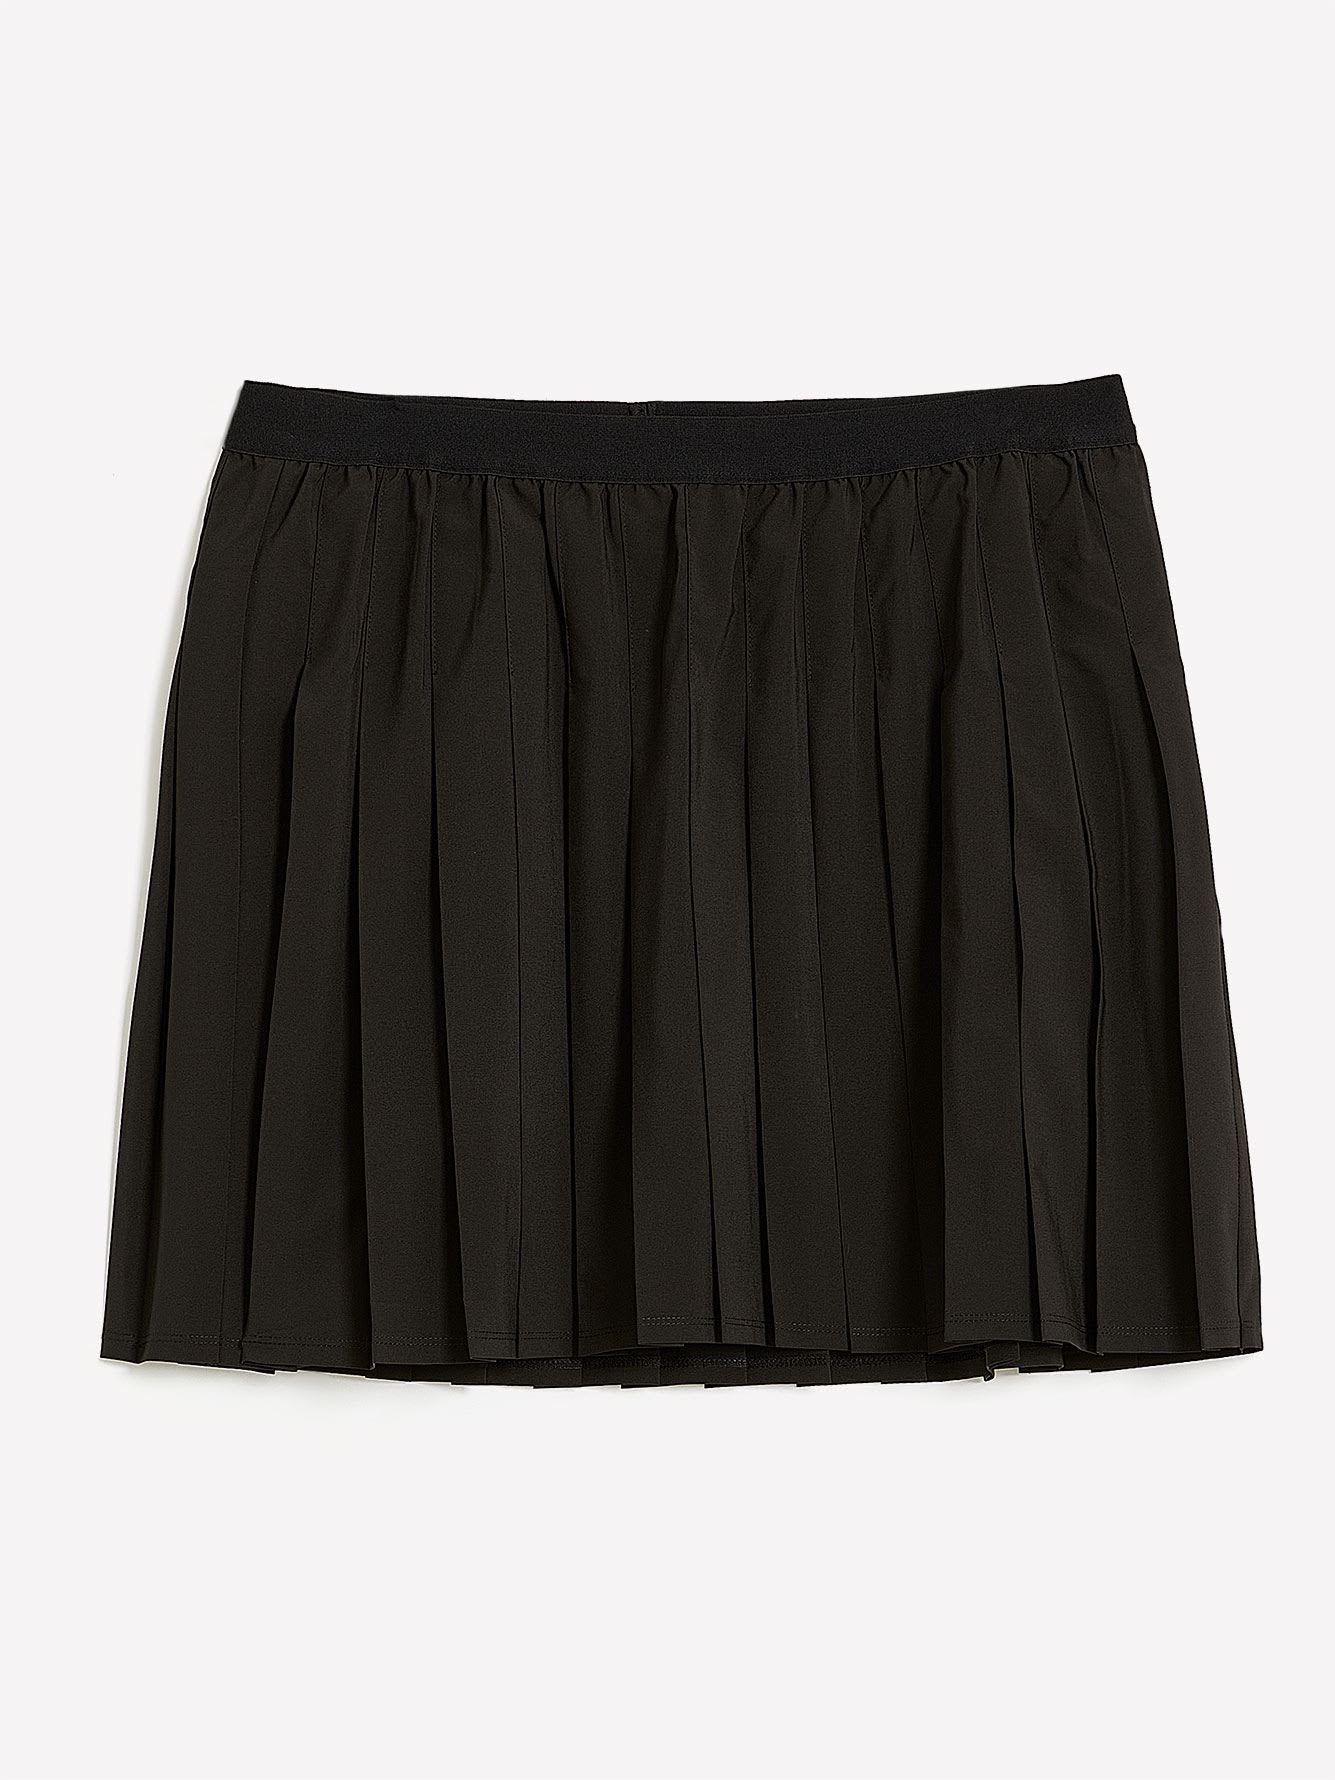 Responsible, Stretch Pleated Skort - Active Zone